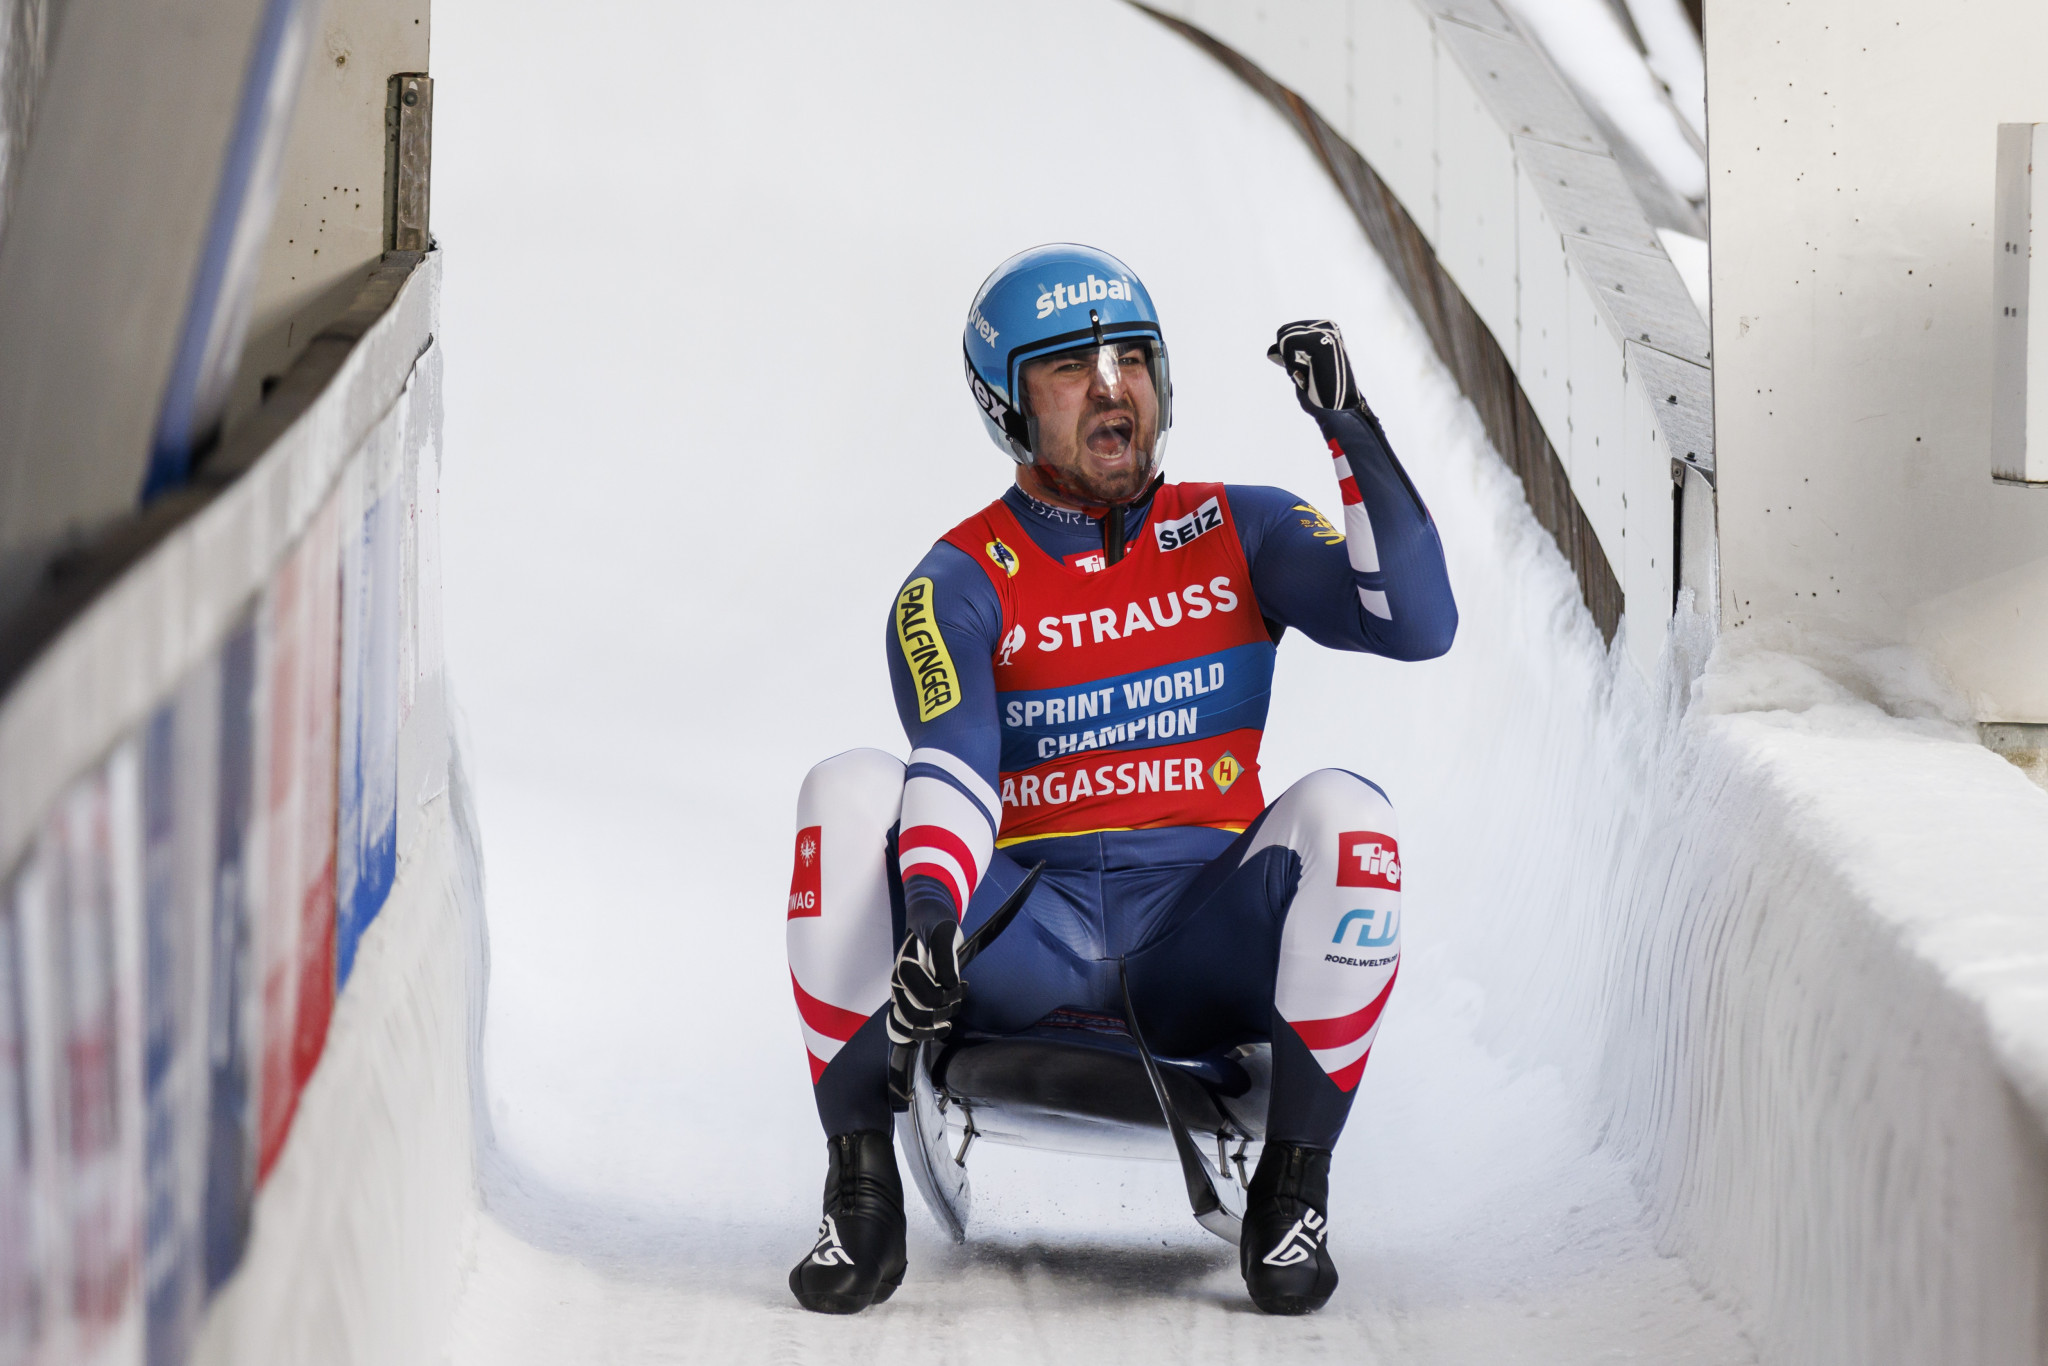 Nico Gleirscher is one of several contenders to take the men's luge singles world title ©Getty Images